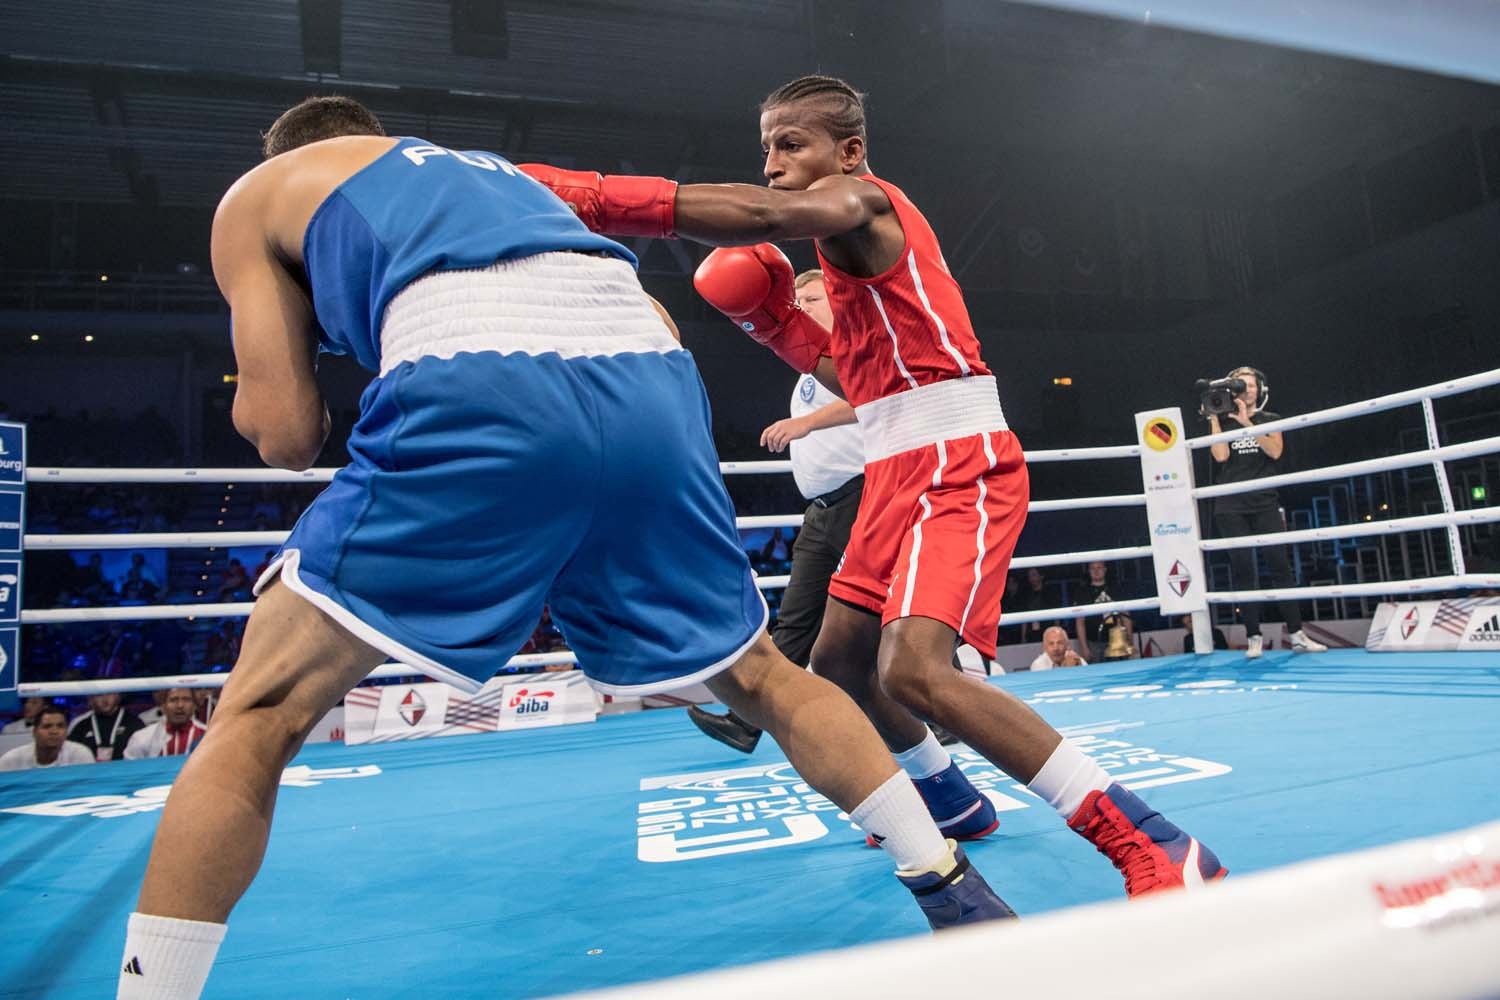 Argilagos among leading names to triumph on day three of AIBA World Championships